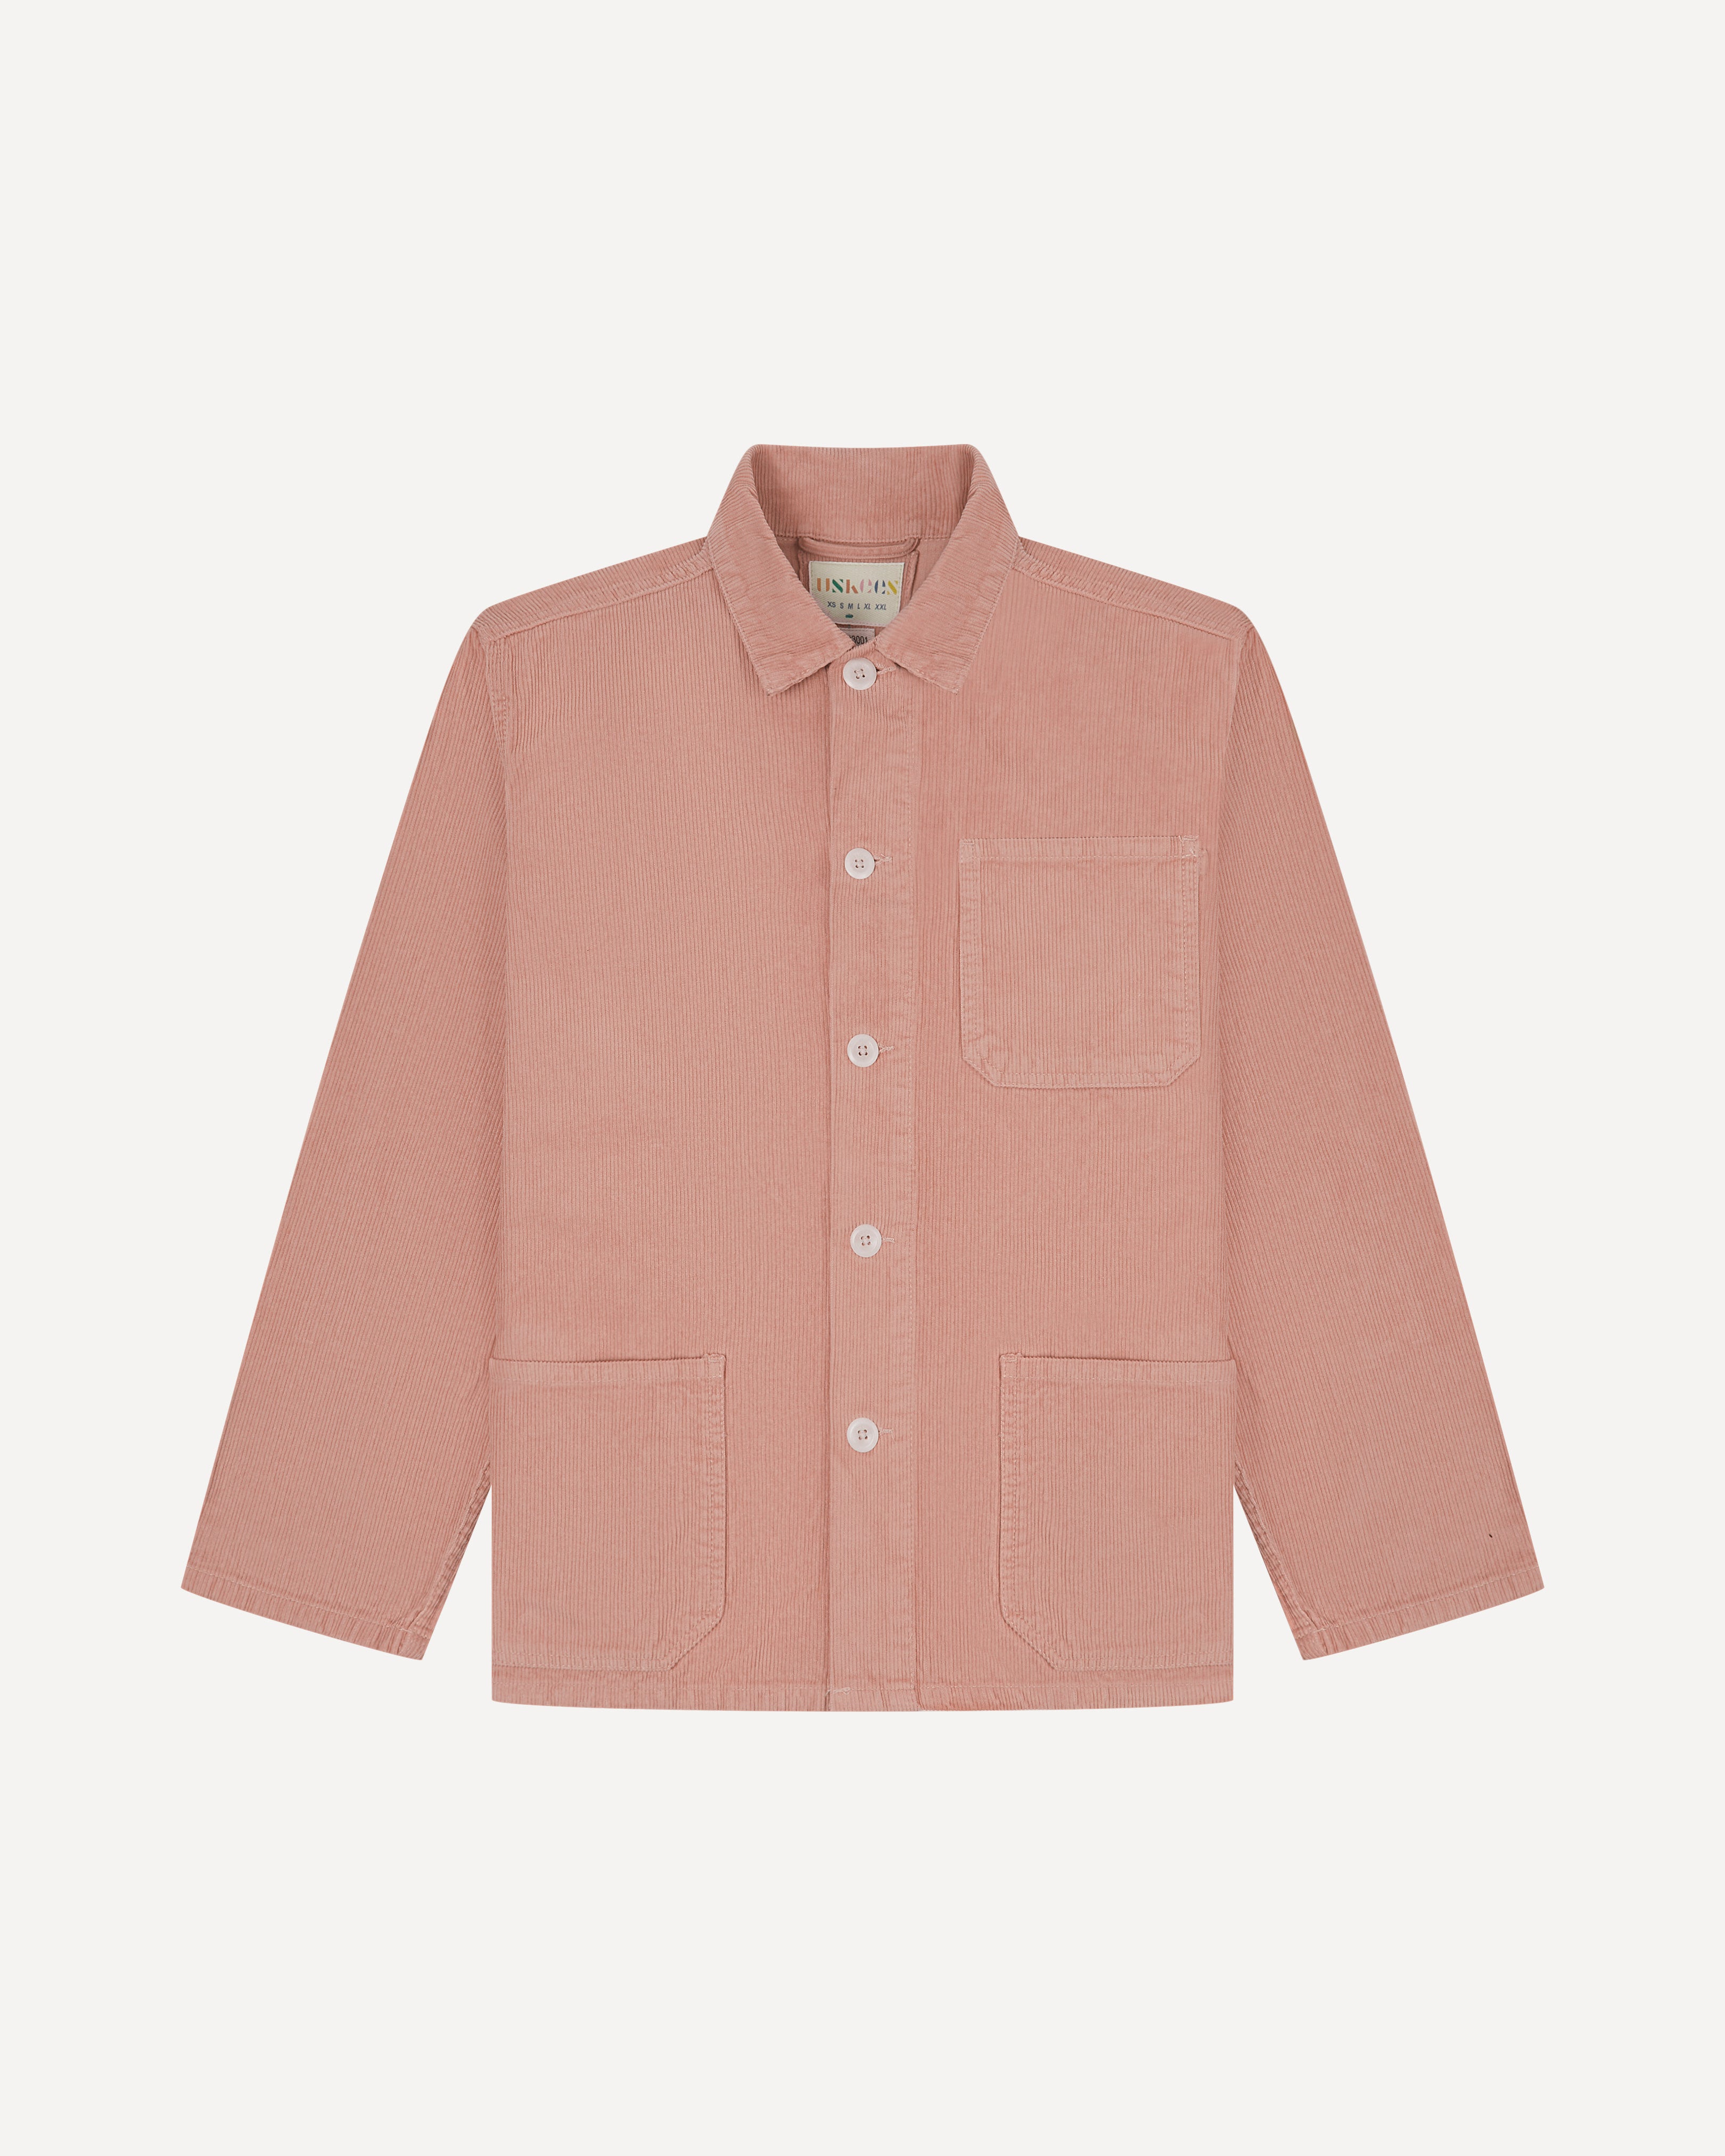 Front flat shot of pale pink, buttoned corduroy overshirt from Uskees. Clear view of corozo buttons, chest and hip pockets.